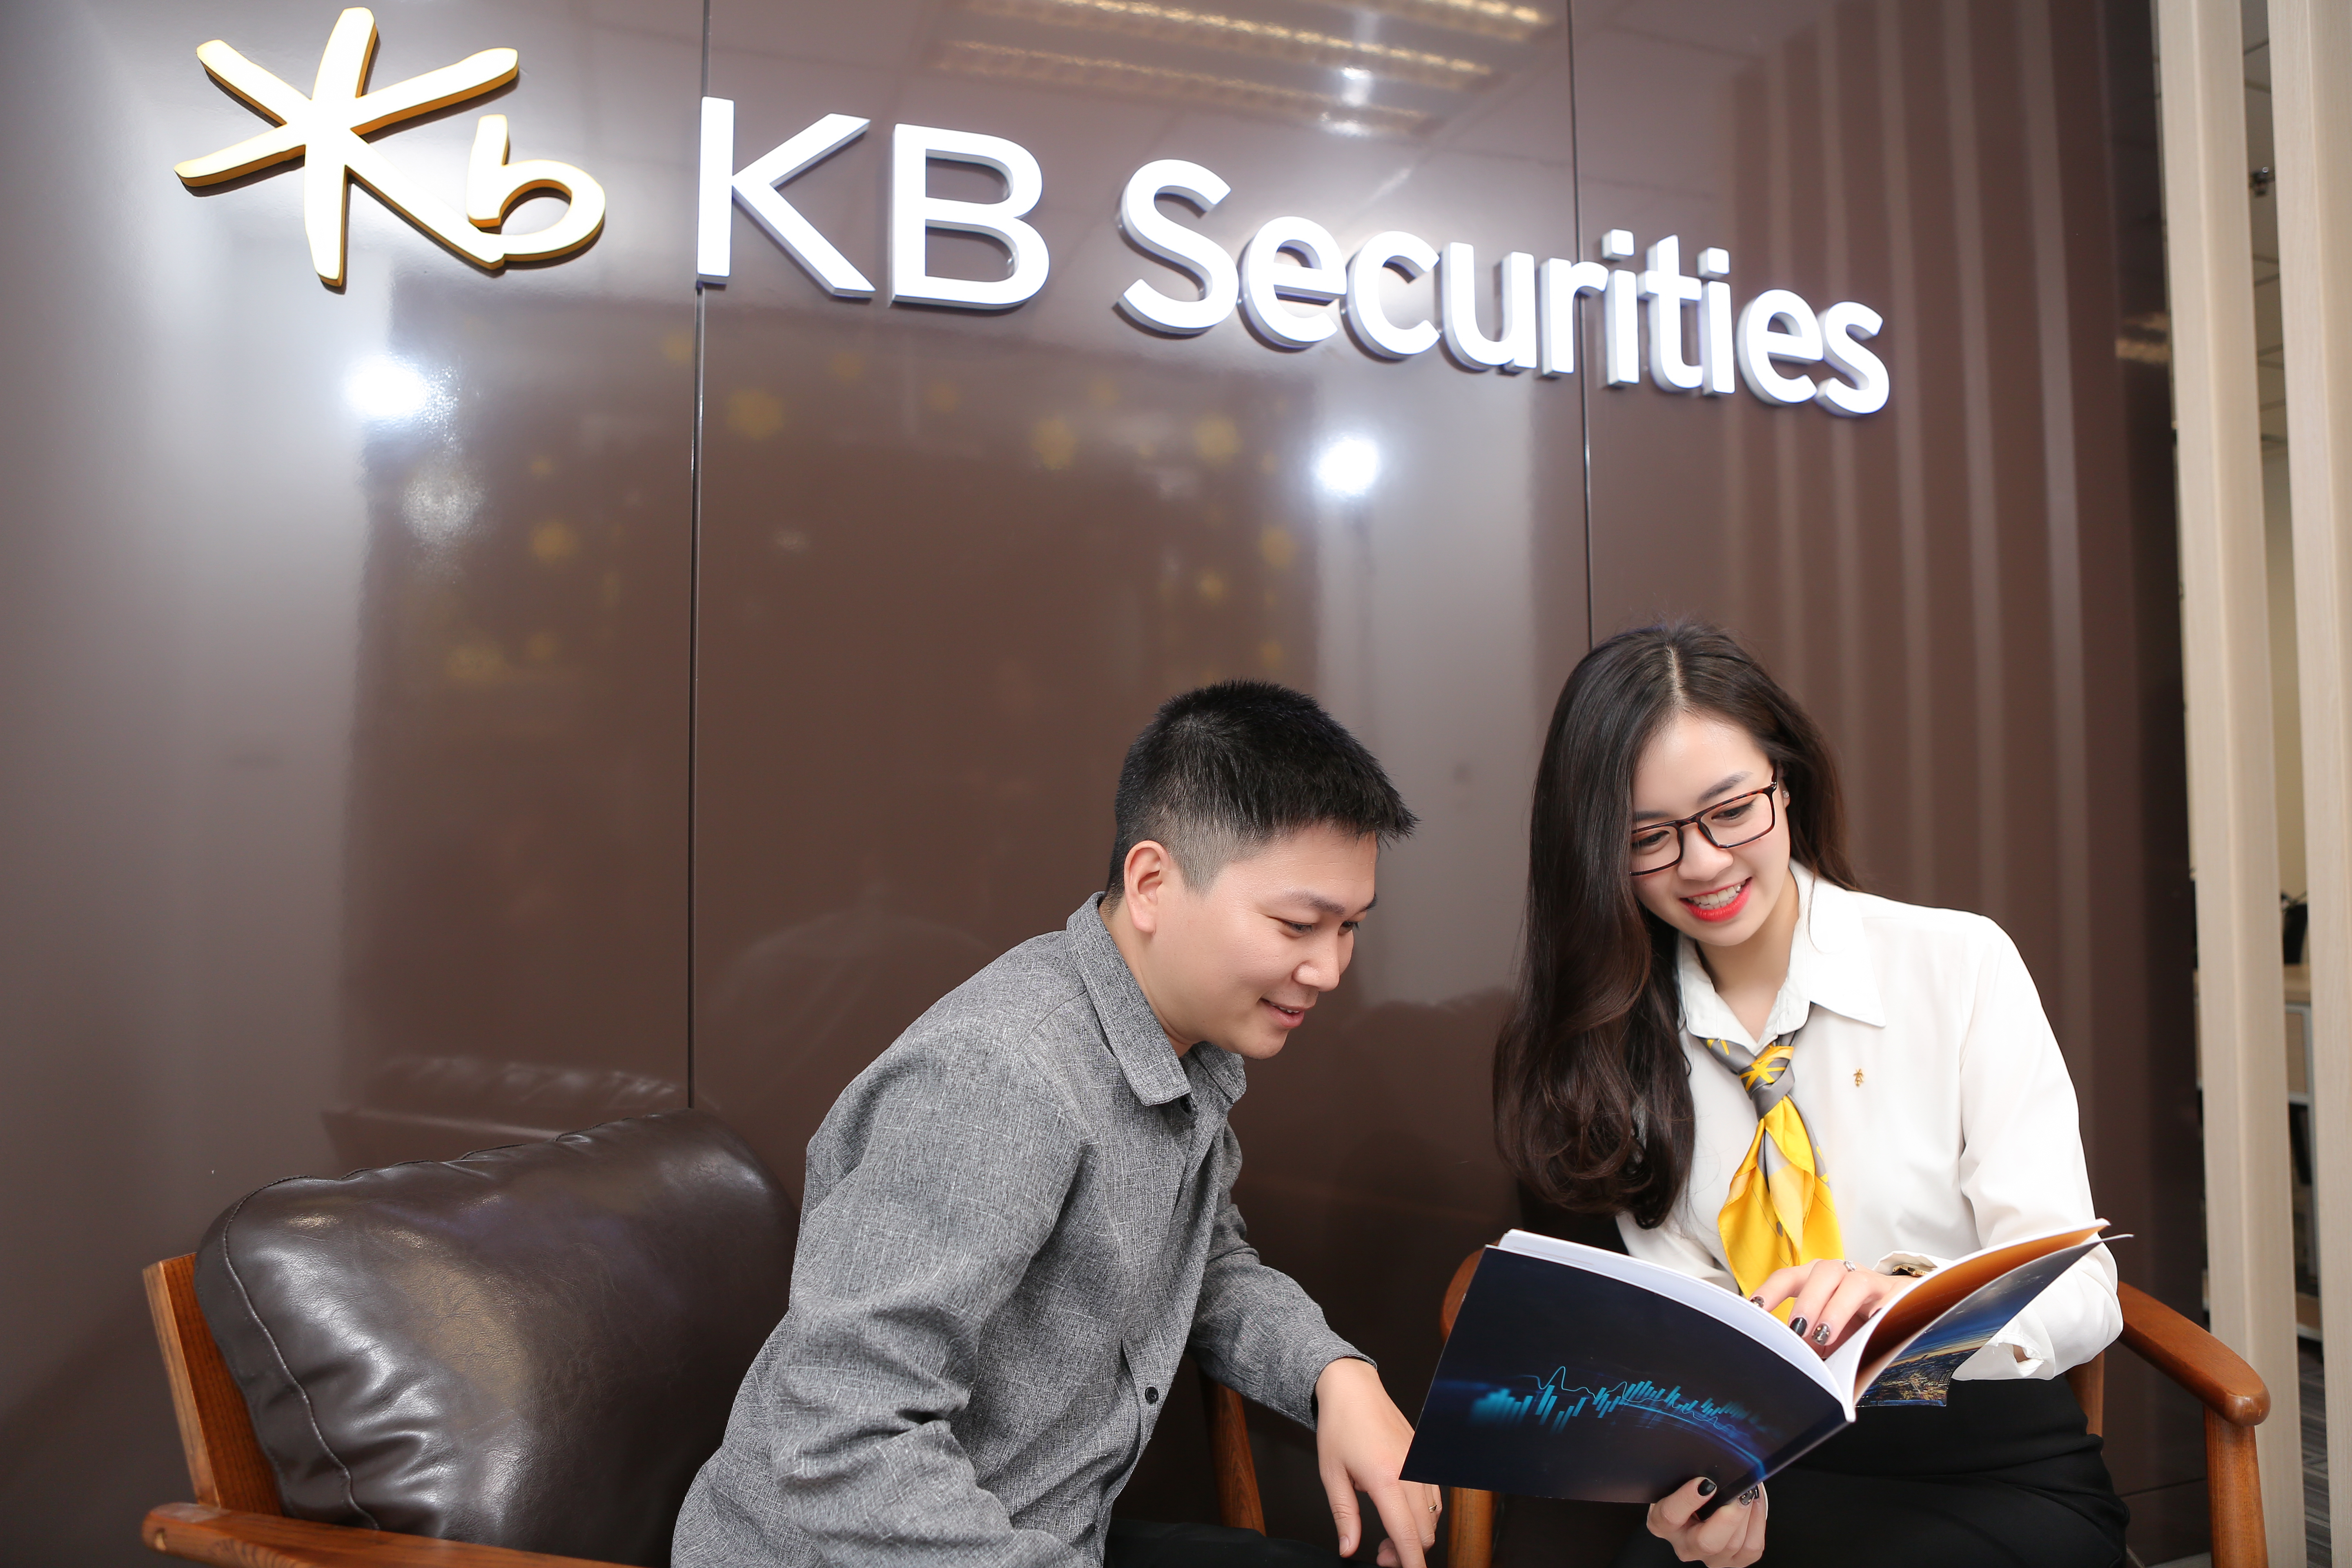 KBSV’s Profit before tax is VND 43 billion, increased by 72% as compared to same period of last year